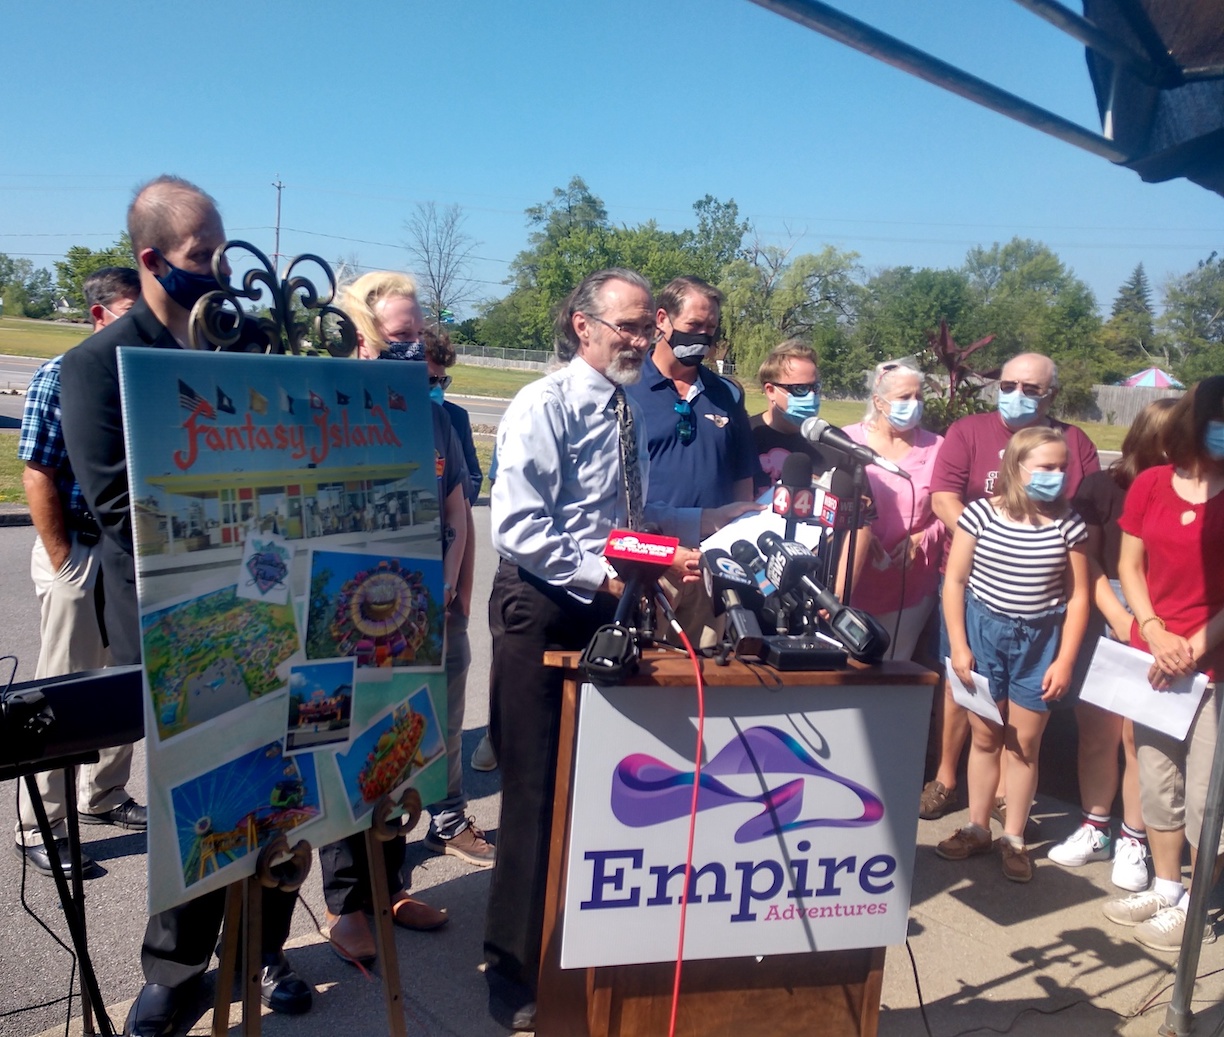 Empire Adventures CEO Bill Baldwin addresses the media and (below) speaks with Assemblyman Angelo Morinello. (Photo by Mike Billoni)